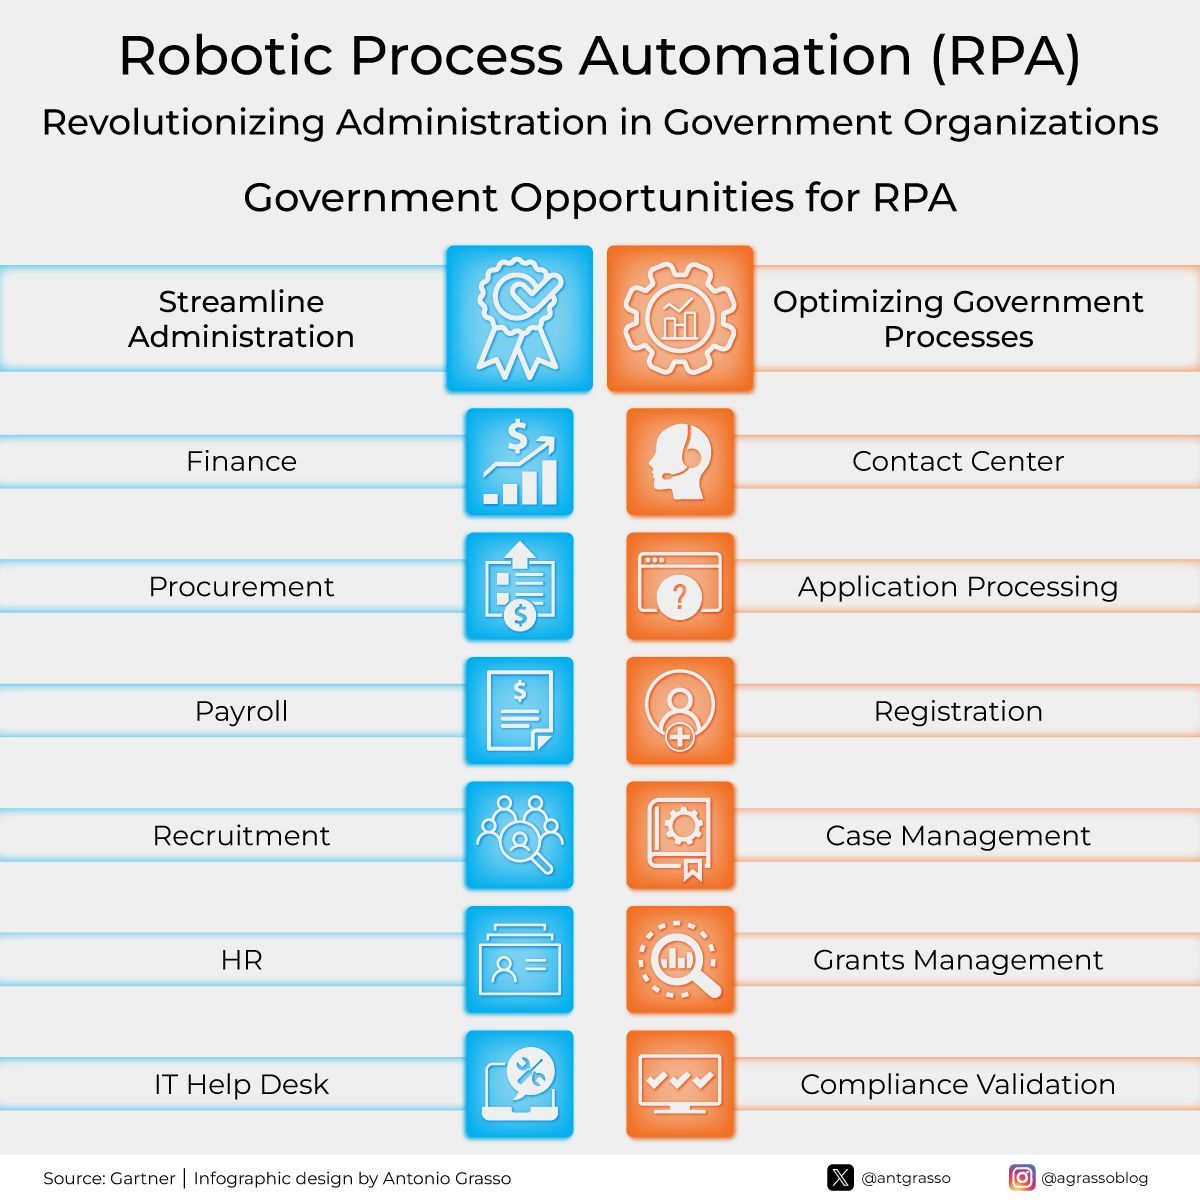 RPA is revolutionizing government operations by automating routine tasks like finance, procurement, and HR, allowing staff to focus on strategic work, improving efficiency and citizen satisfaction. Microblog @antgrasso #RPA #Government